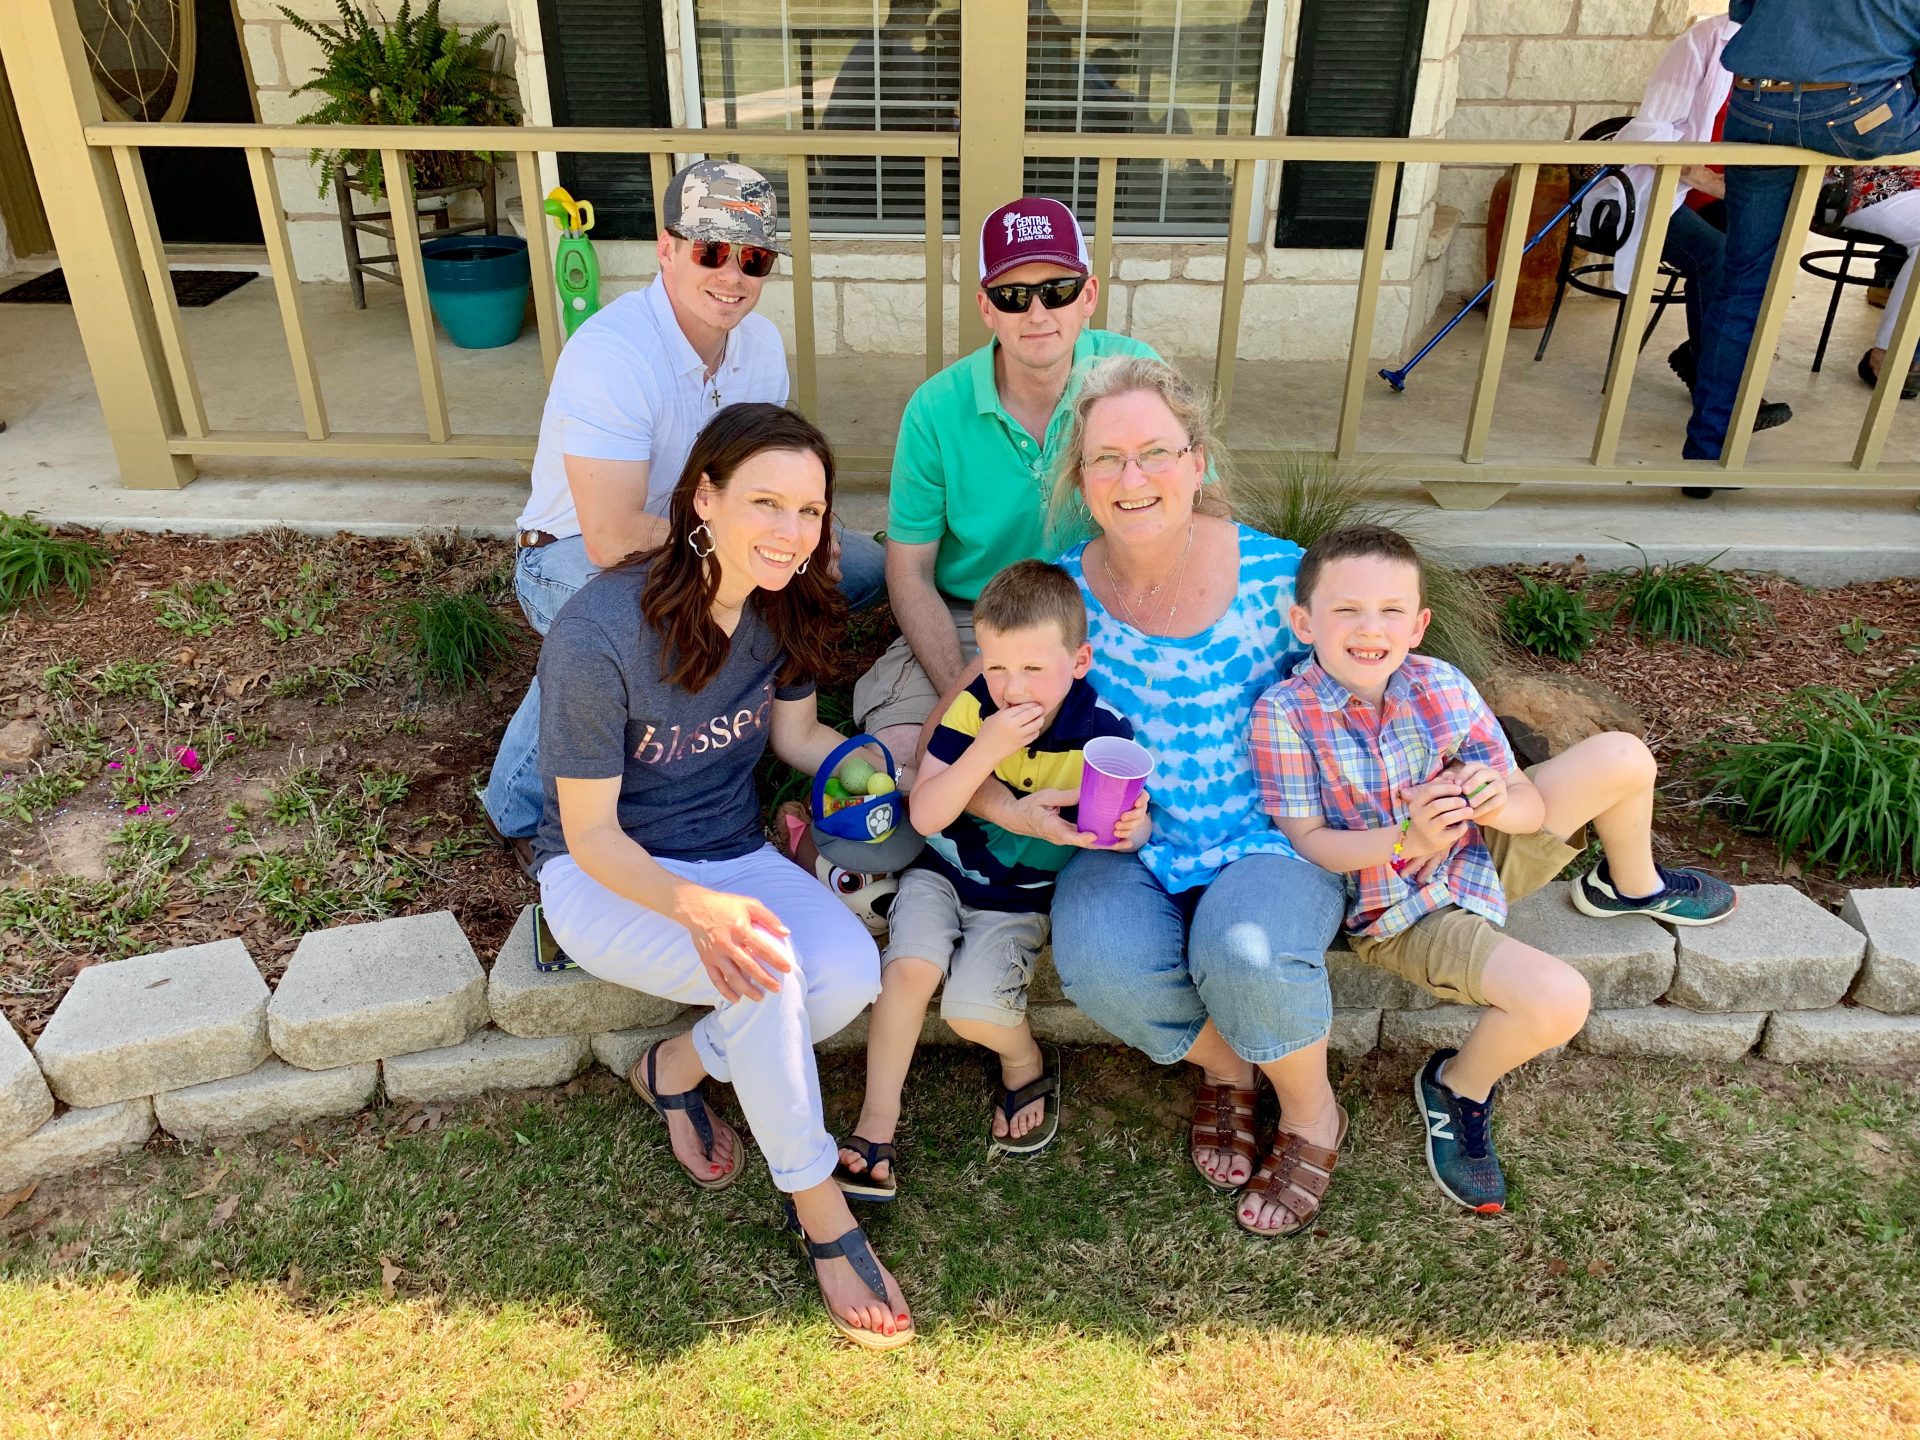 AgTrust Farm Credit's Director of Loan Accounting and Operations, Janet Mathis and her son who is a Sr. Loan Officer at AgTrust Farm Credit Walker Dailey with their family.